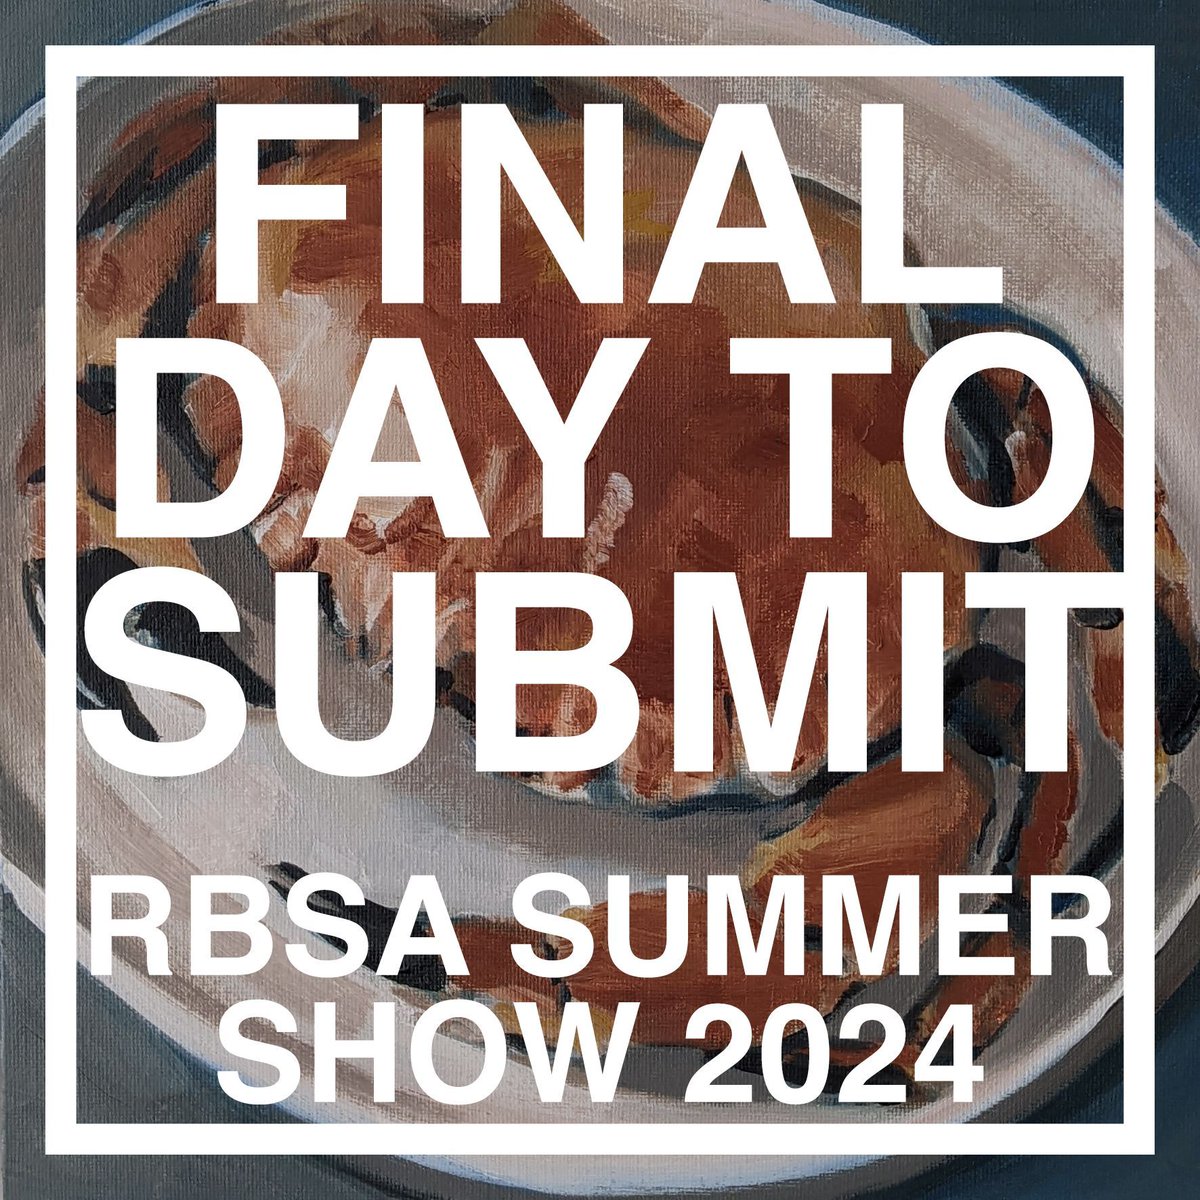 Today is the final day for submissions to the RBSA Summer Show 2024. The deadline is at 4pm. Visit bit.ly/4amCZzn to enter, don't miss out! #rbsagallery #callforentries #callforart #callforartists #opencall #openexhibition #opencallexhibition #callingallartists